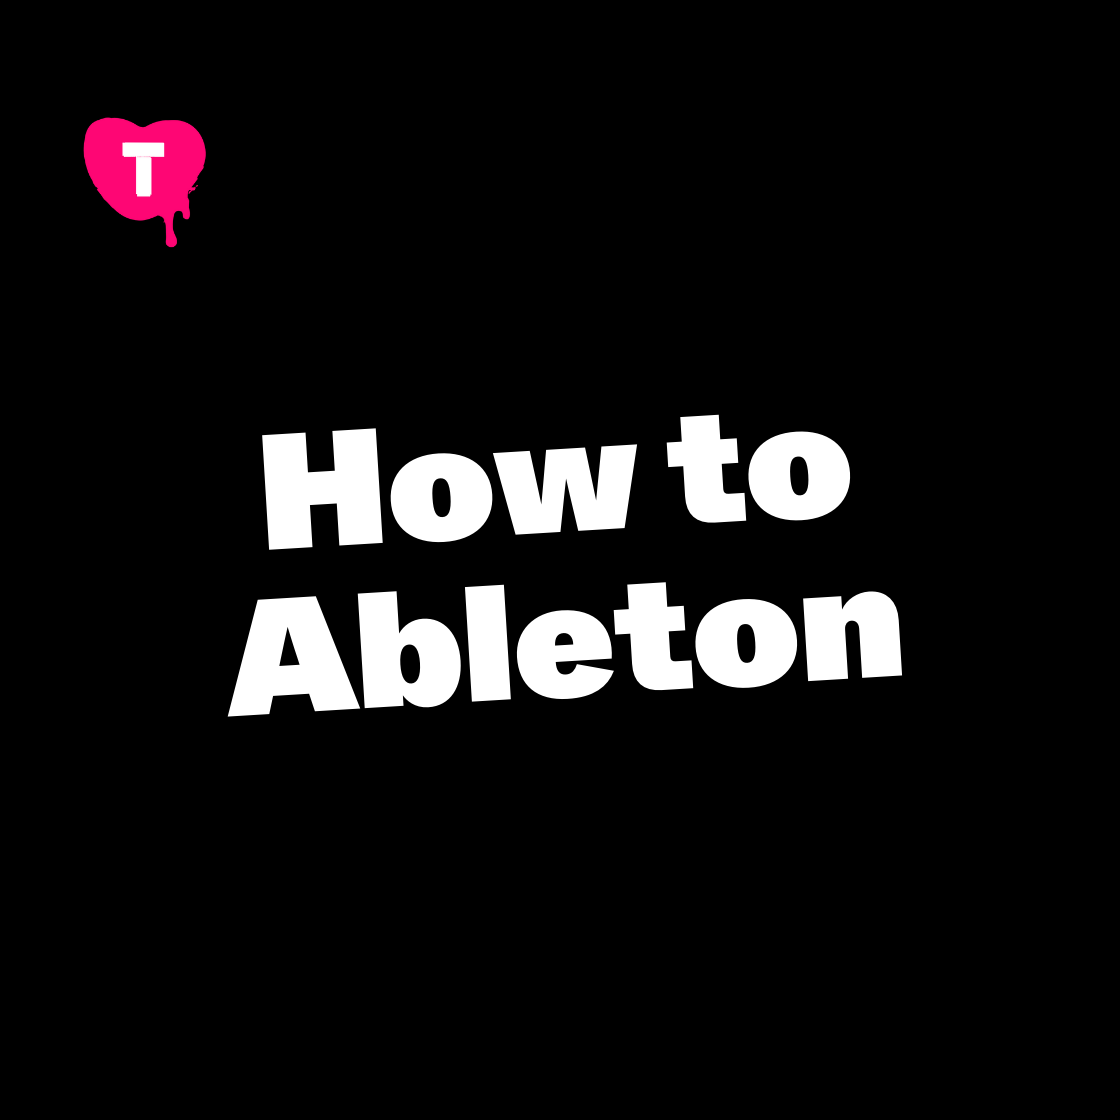 How to Ableton